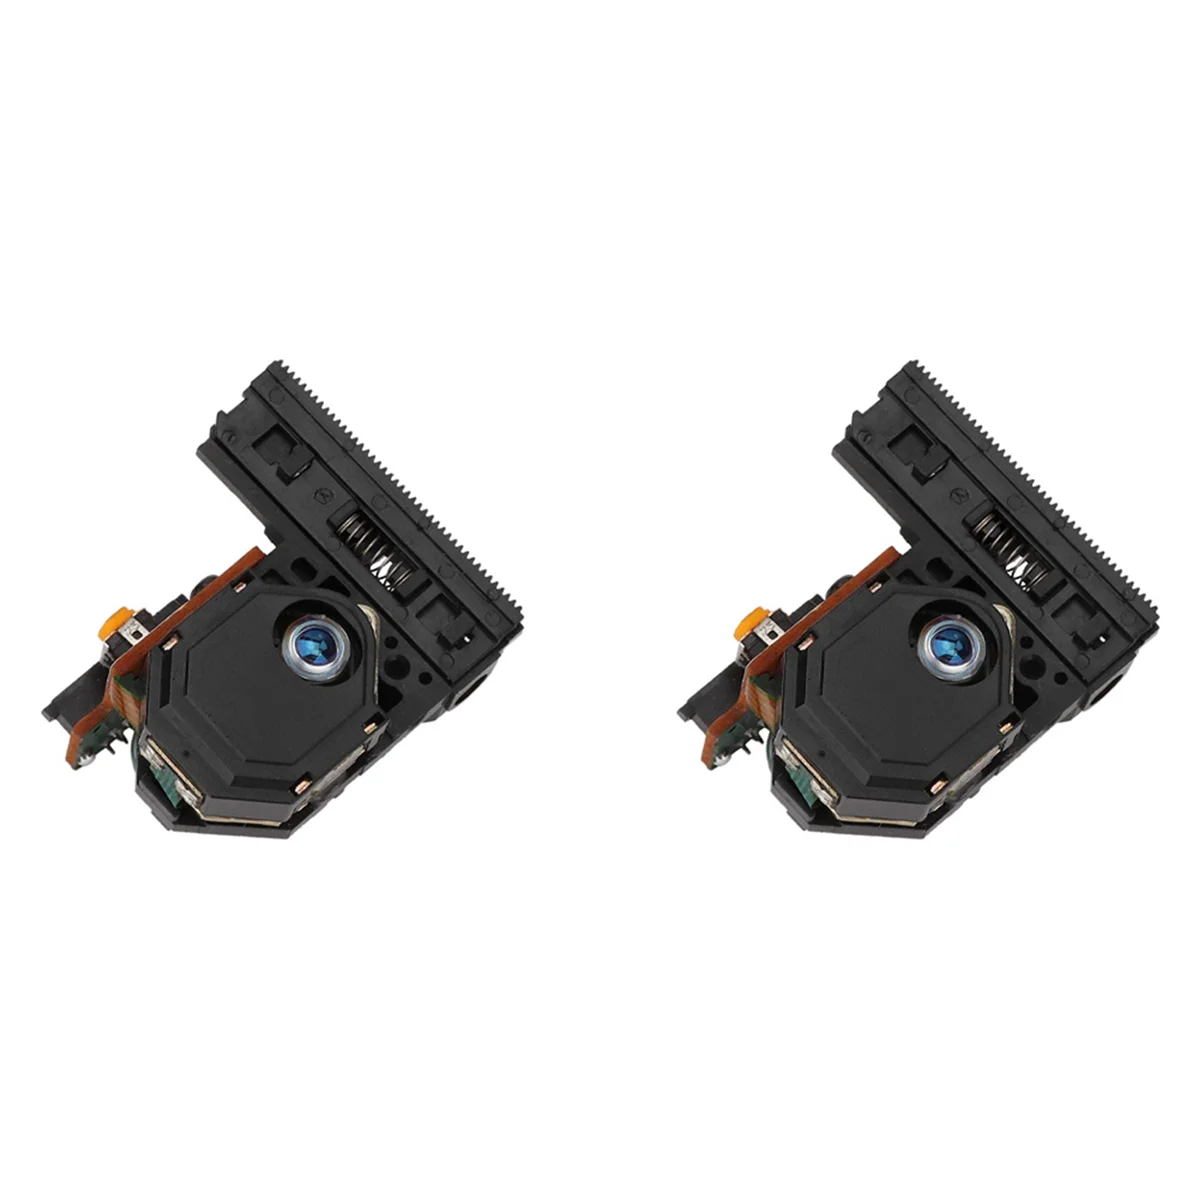 

2X Single Channel Lasers Head KSS-213B Optical Pickup Bluray Lasers Lens CD/VCD Mechanism Replacement Parts